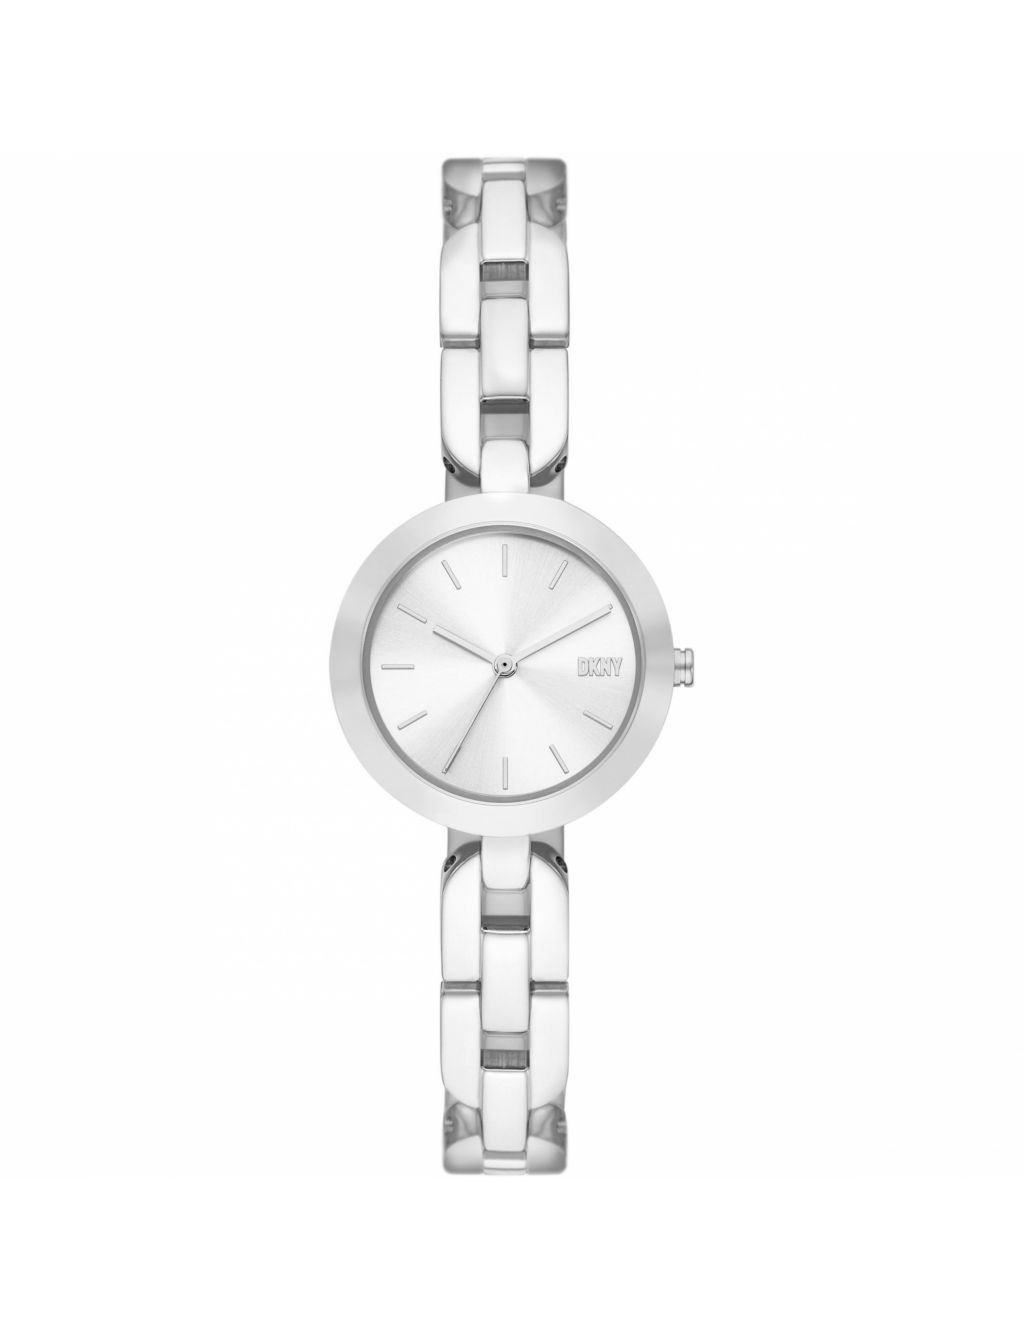 DKNY City Link Silver Watch image 1